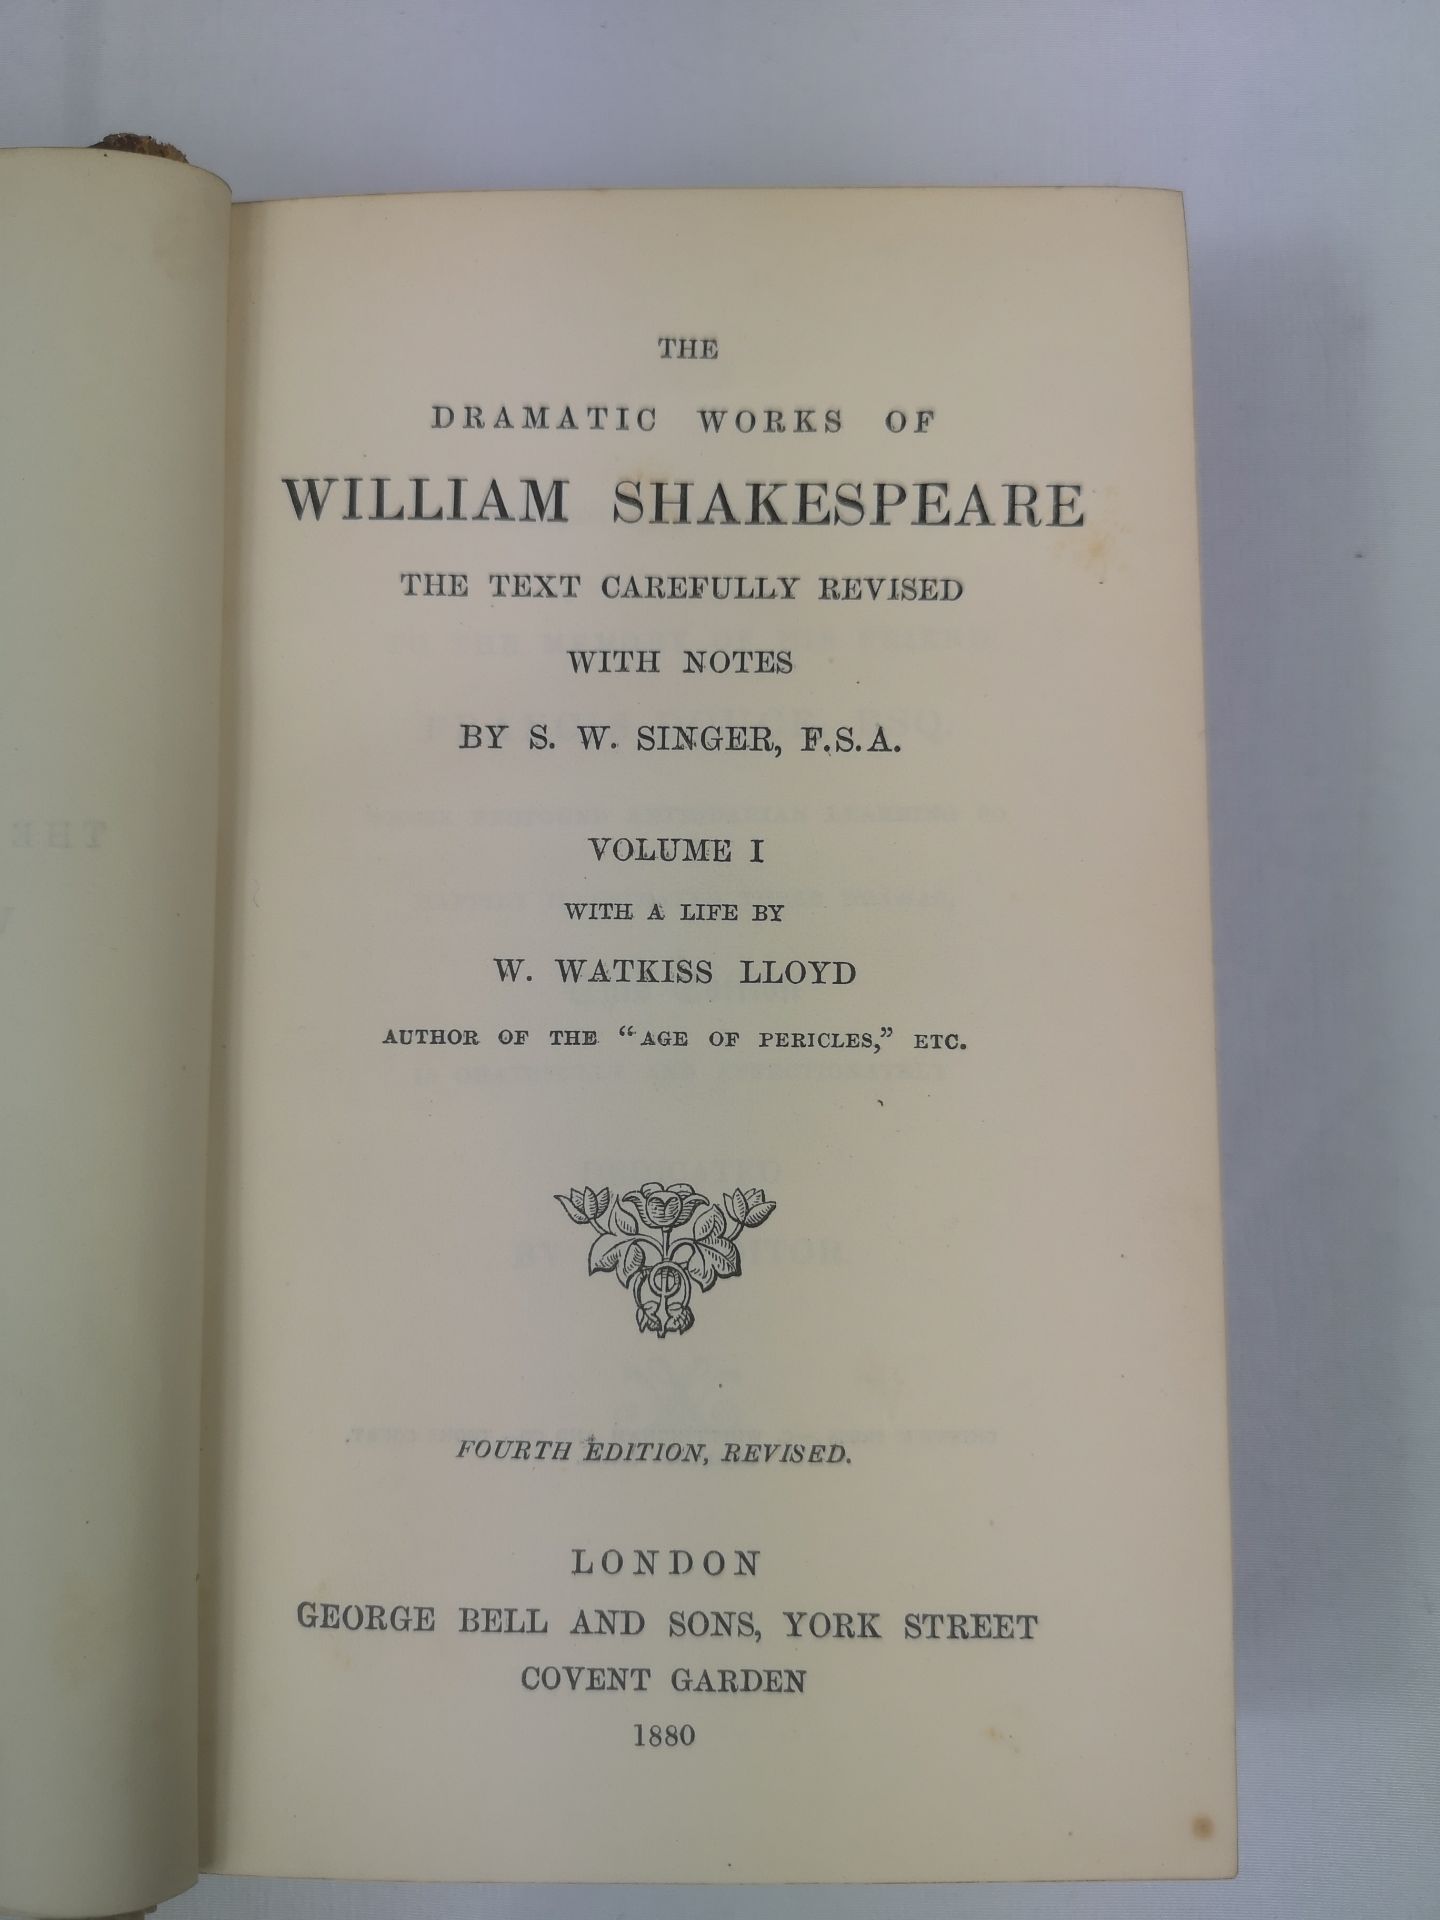 The Dramatic Works of William Shakespeare in ten half bound volumes - Image 2 of 4